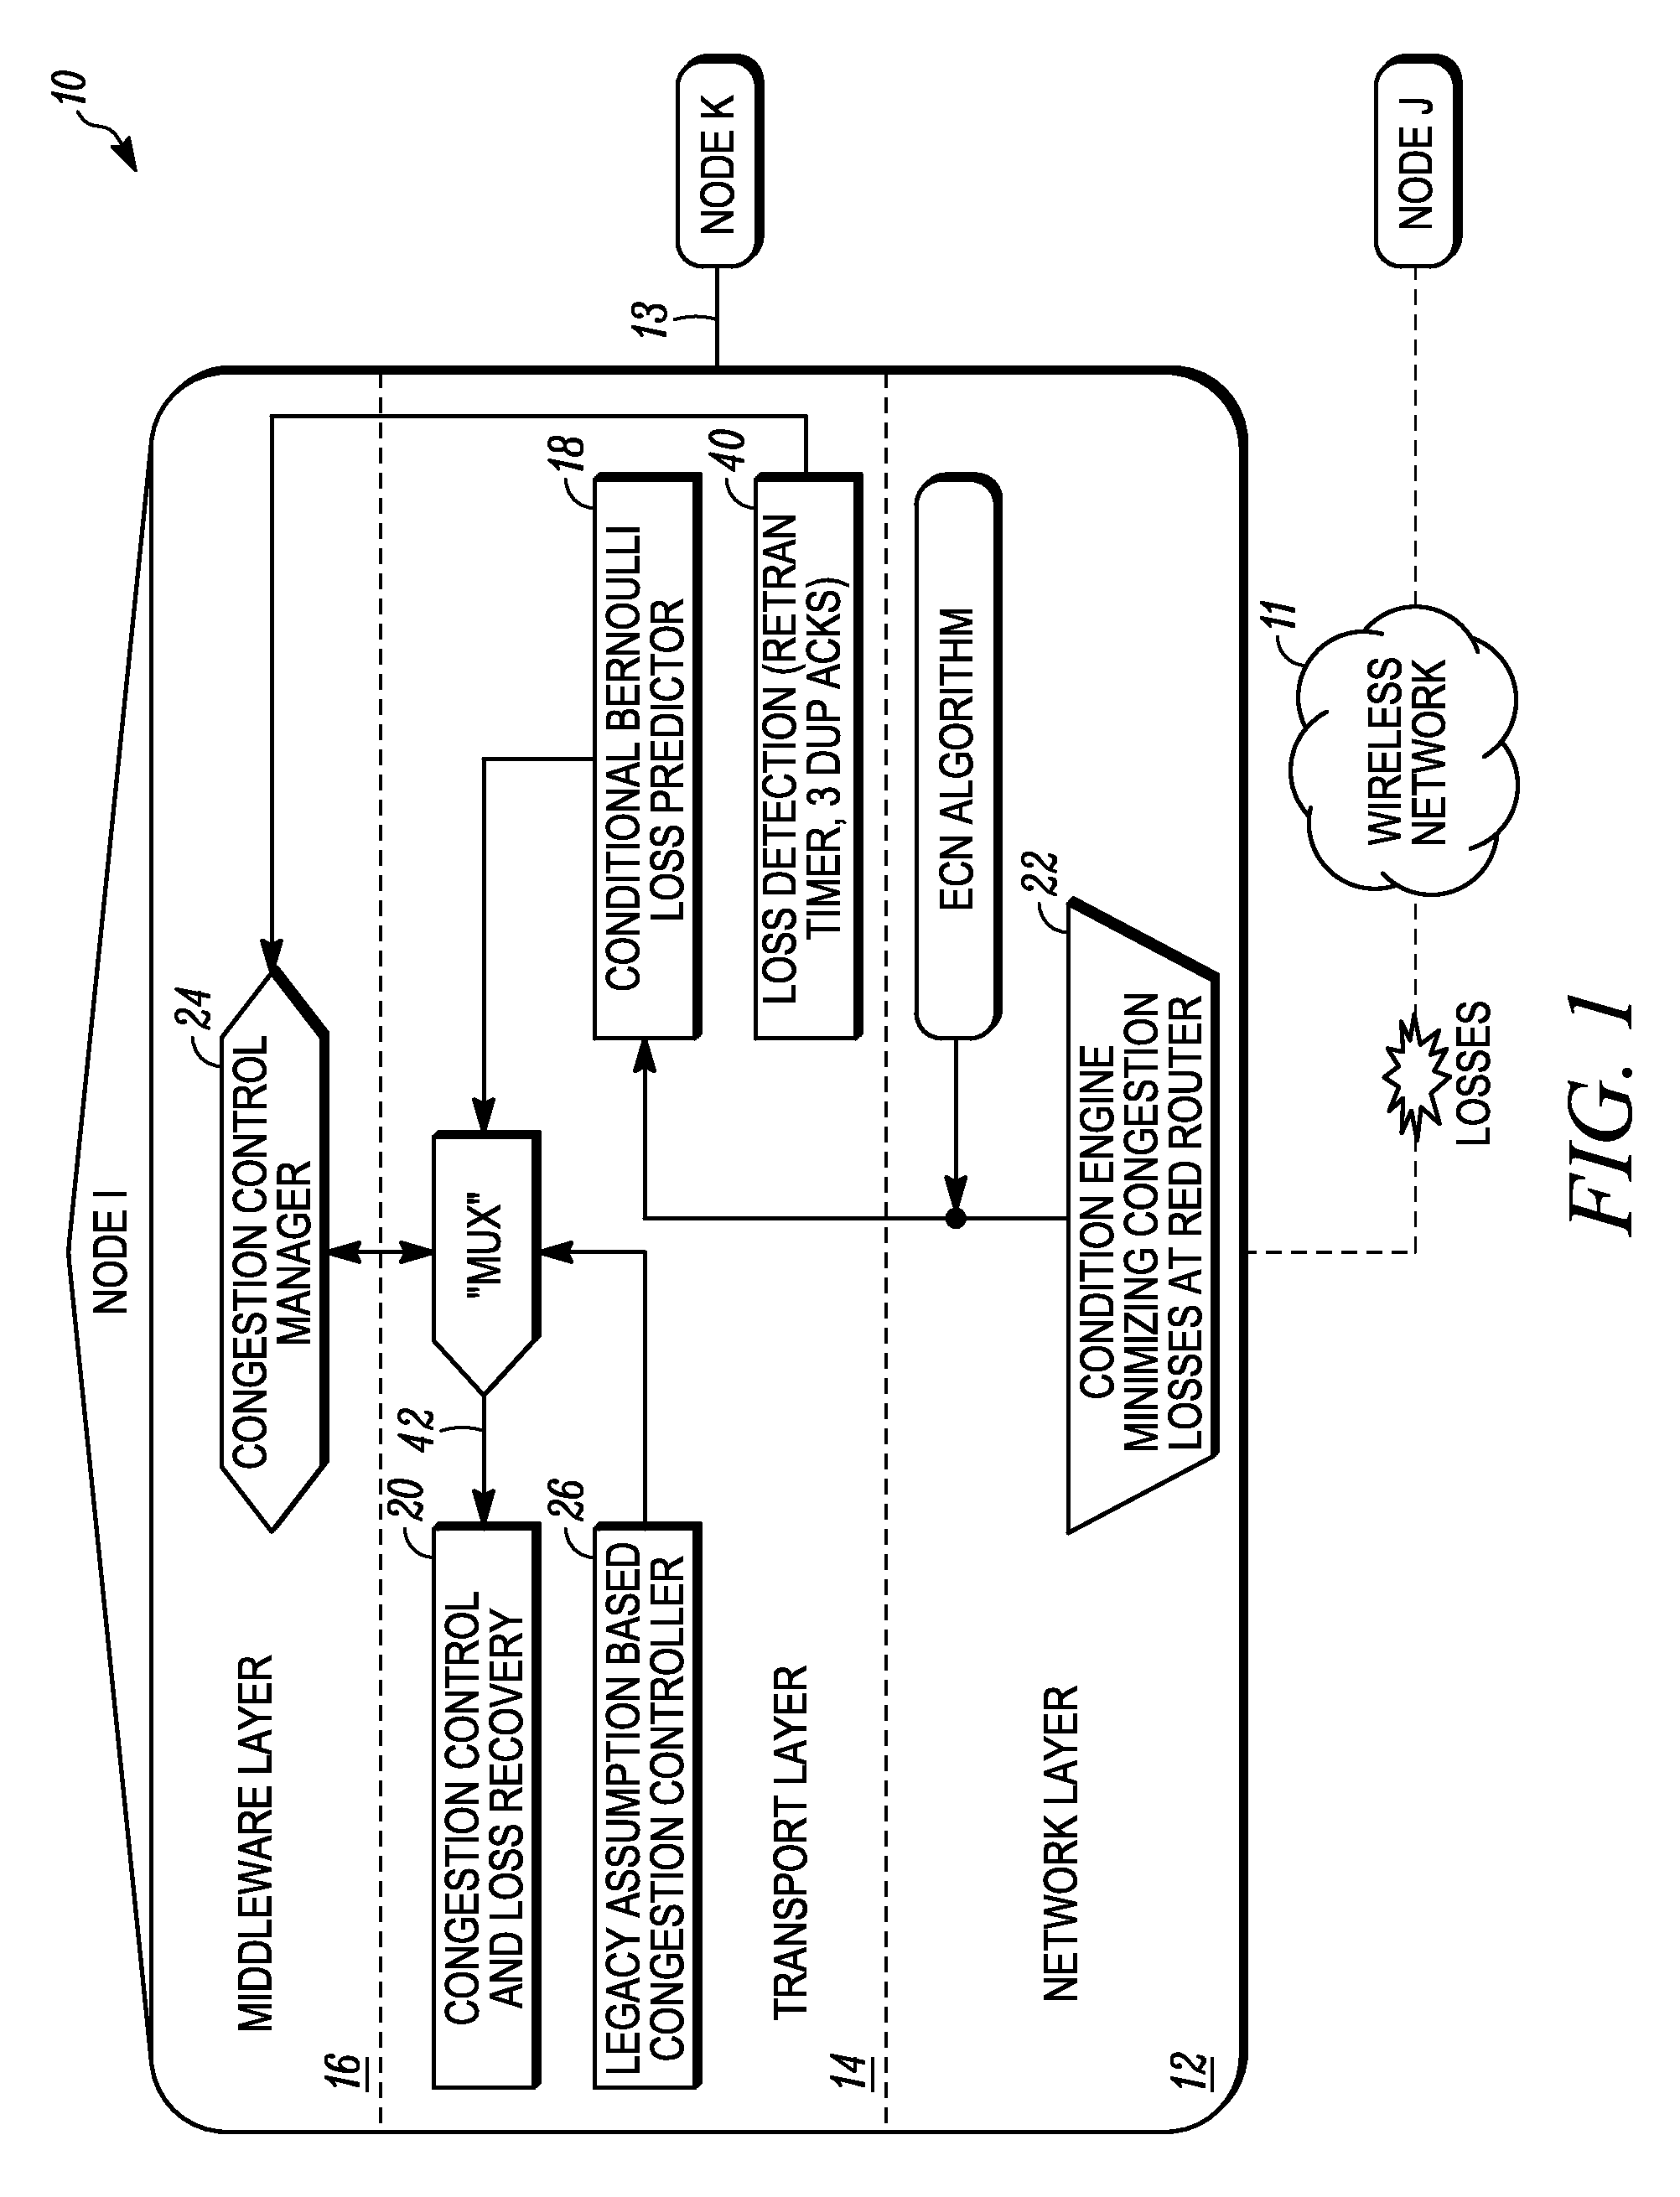 Speculative congestion control system and cross-layer architecture for use in lossy computer networks